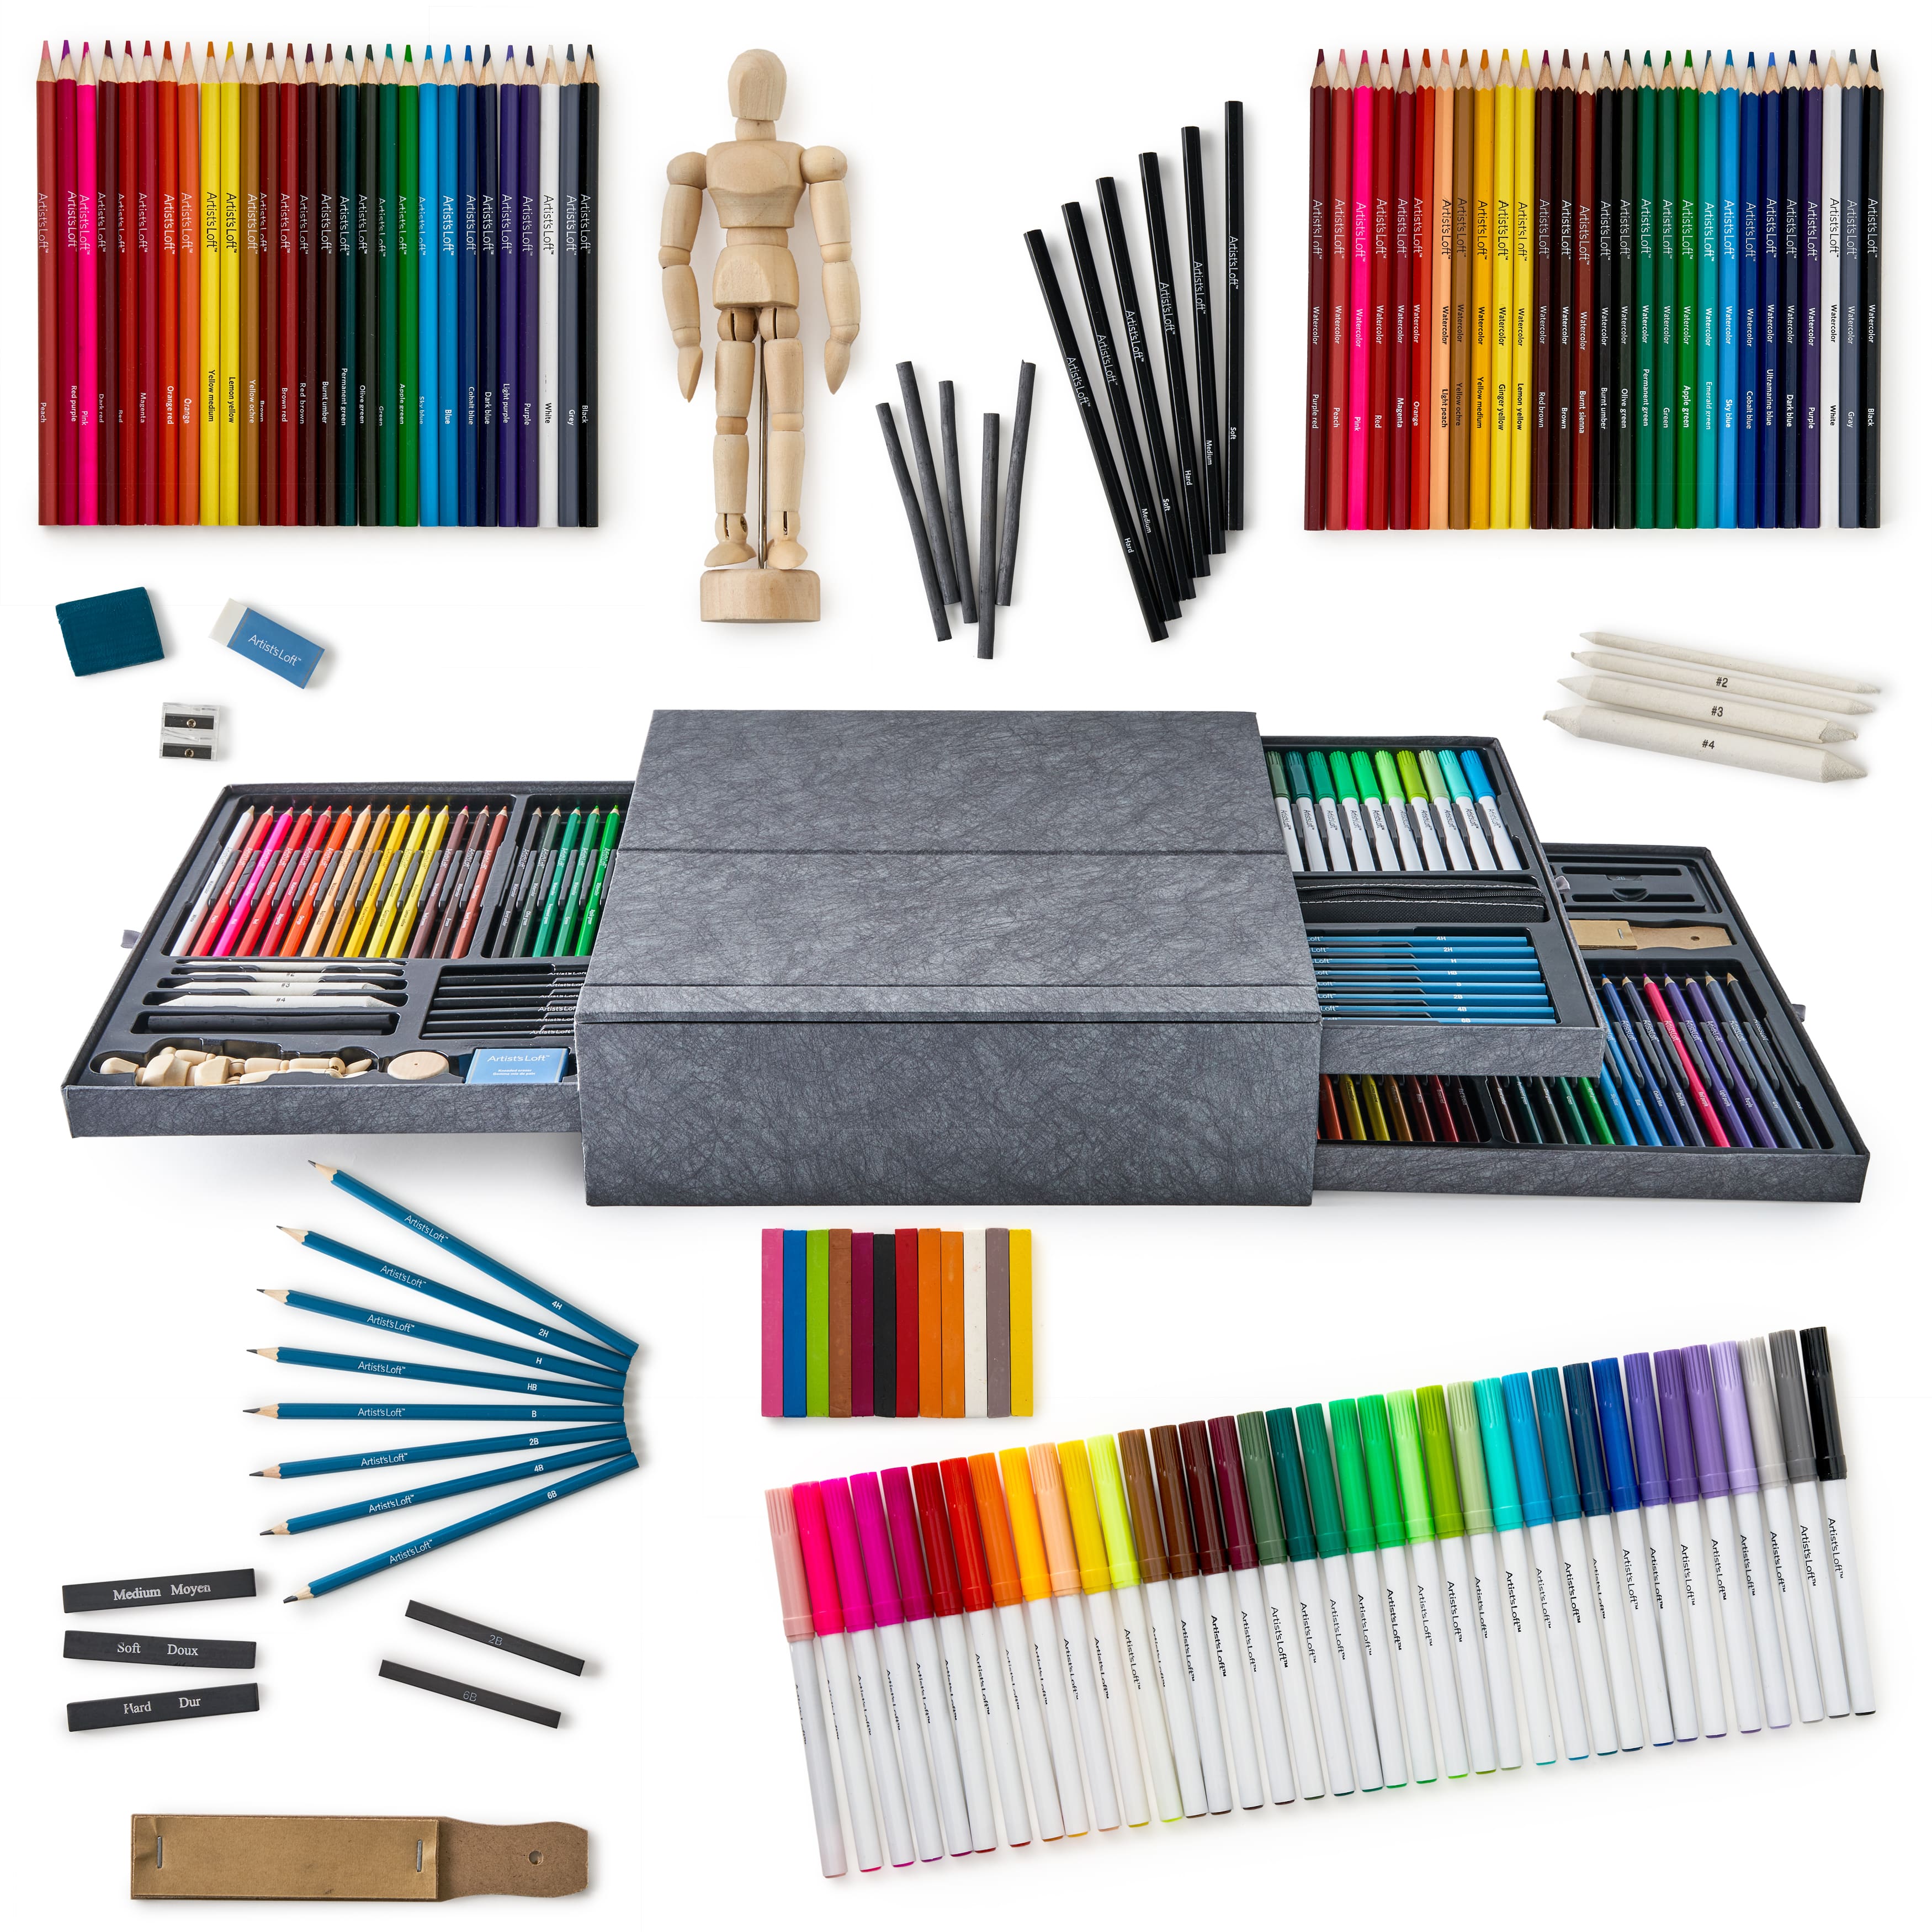 25-Piece Drawing Kit by LUCIDArt